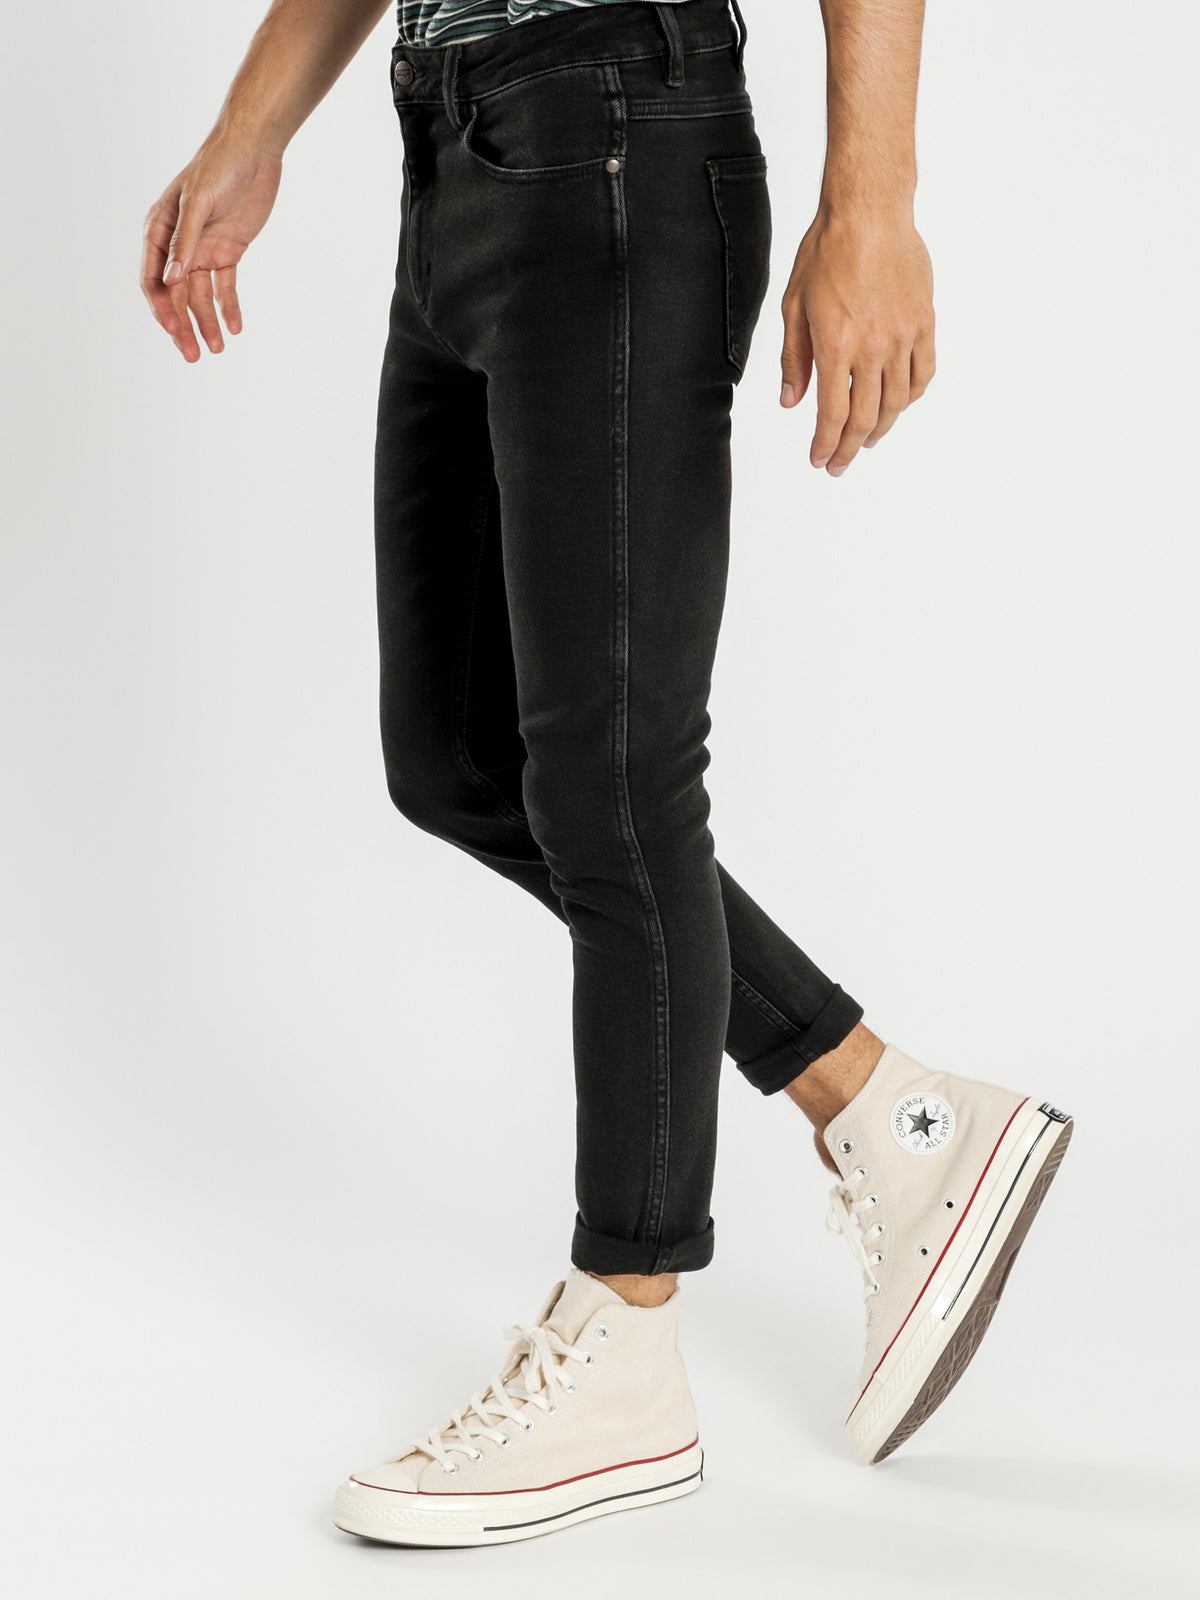 Smith R28 Jeans in Southwind Black